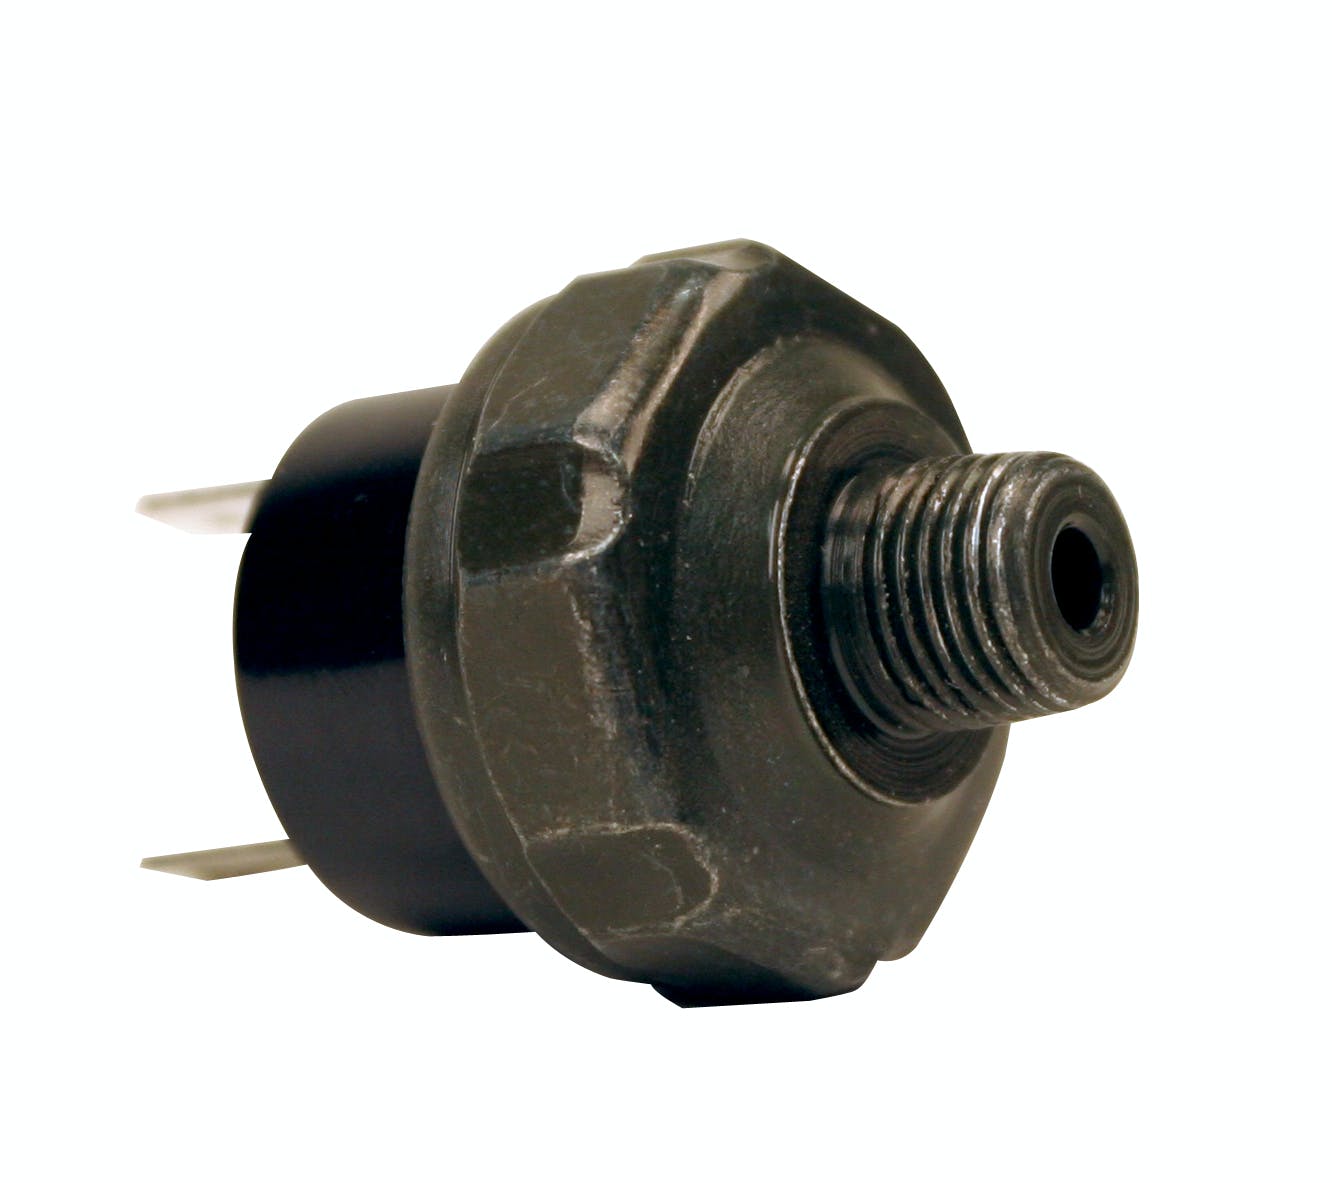 VIAIR 90101 Pressure Switch  1/8in M NPT Port  1/4in Spade Connectors 85 psi On  105 ps